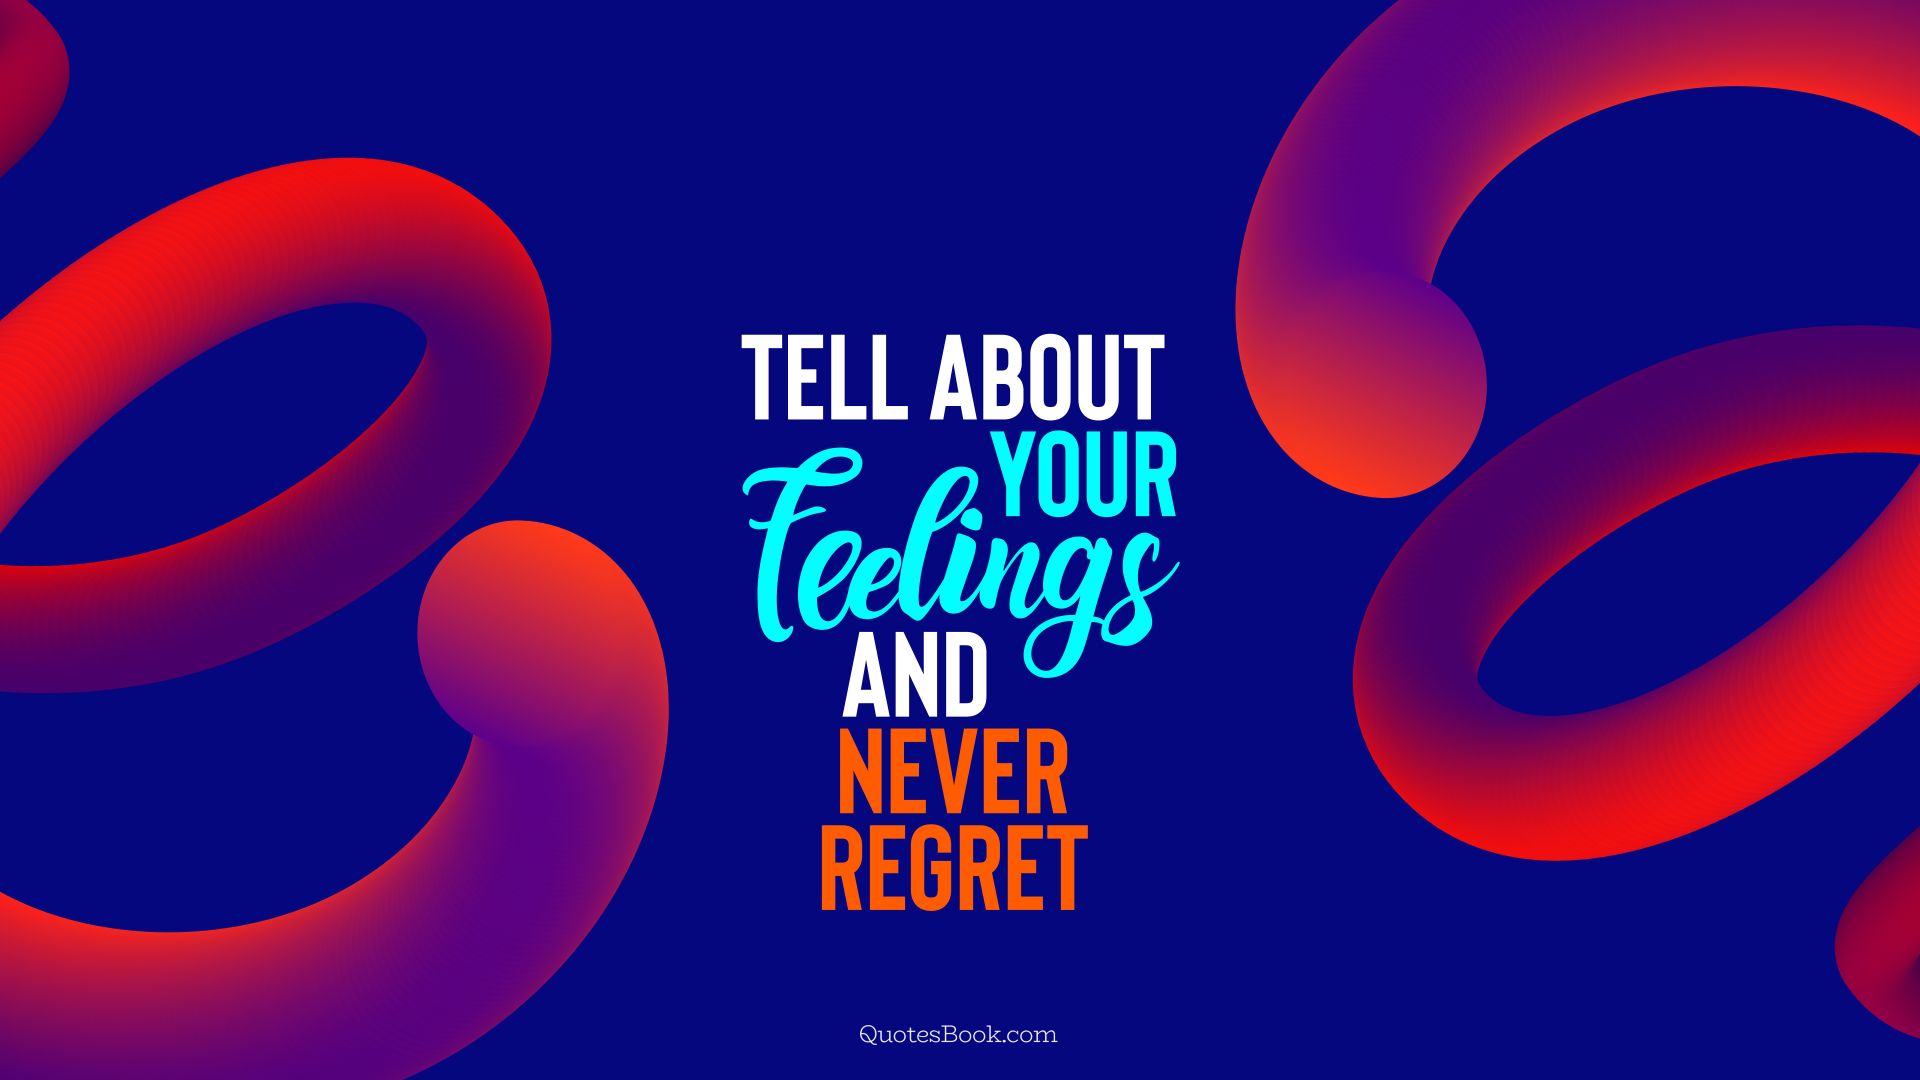 Tell about your feelings and never regret. - Quote by QuotesBook